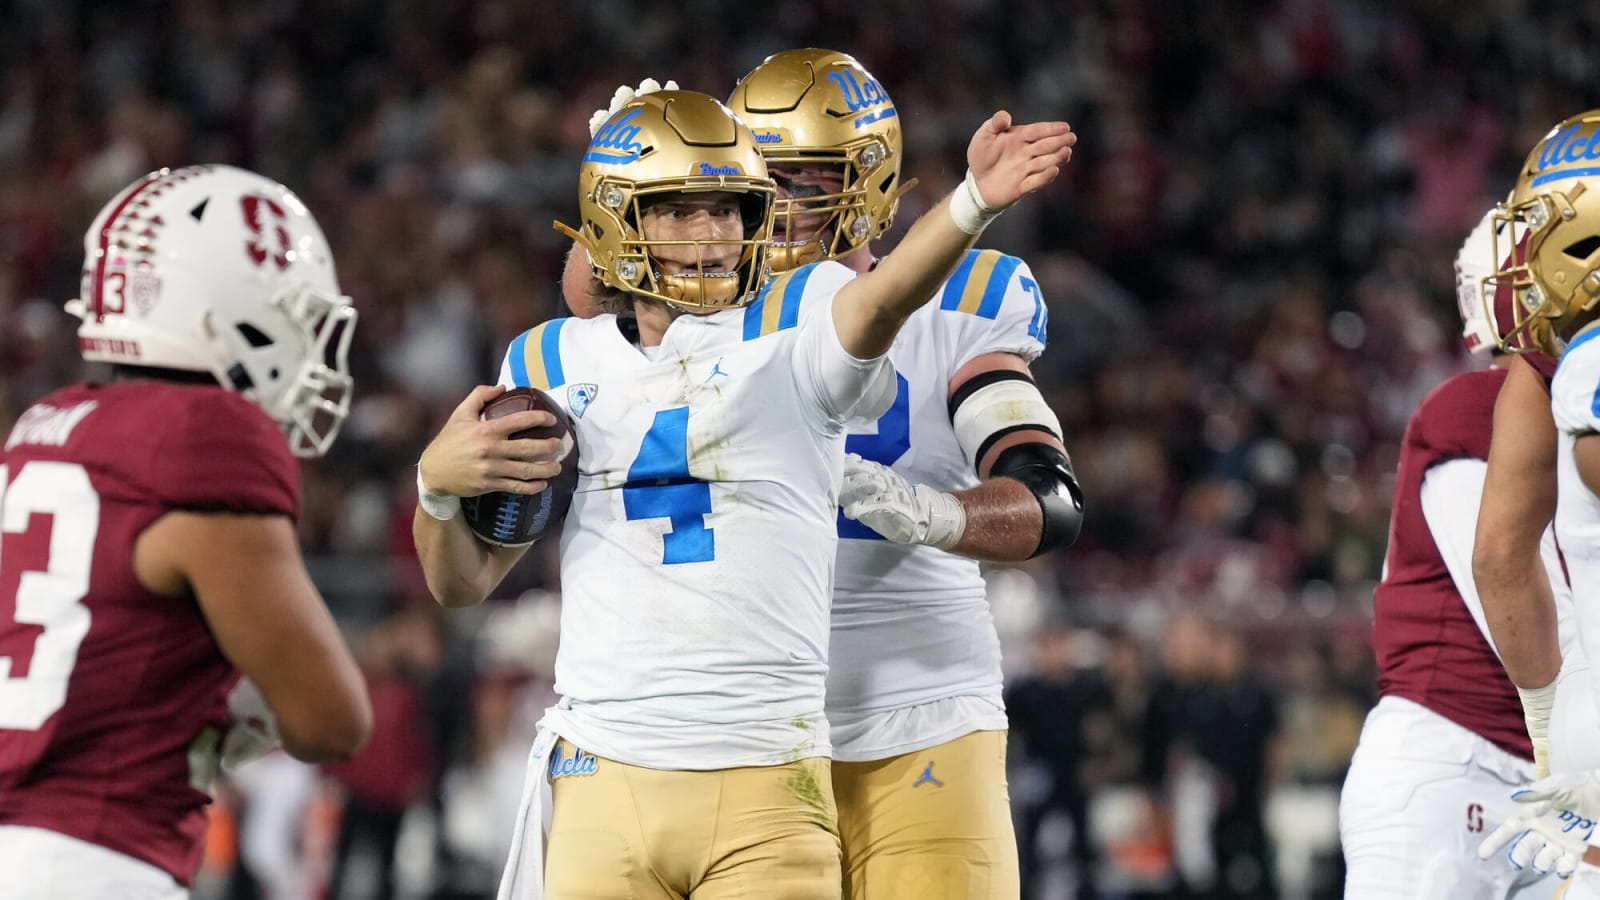 Ethan Garbers Looks Poised Against Stanford – Where Does UCLA Go From Here?